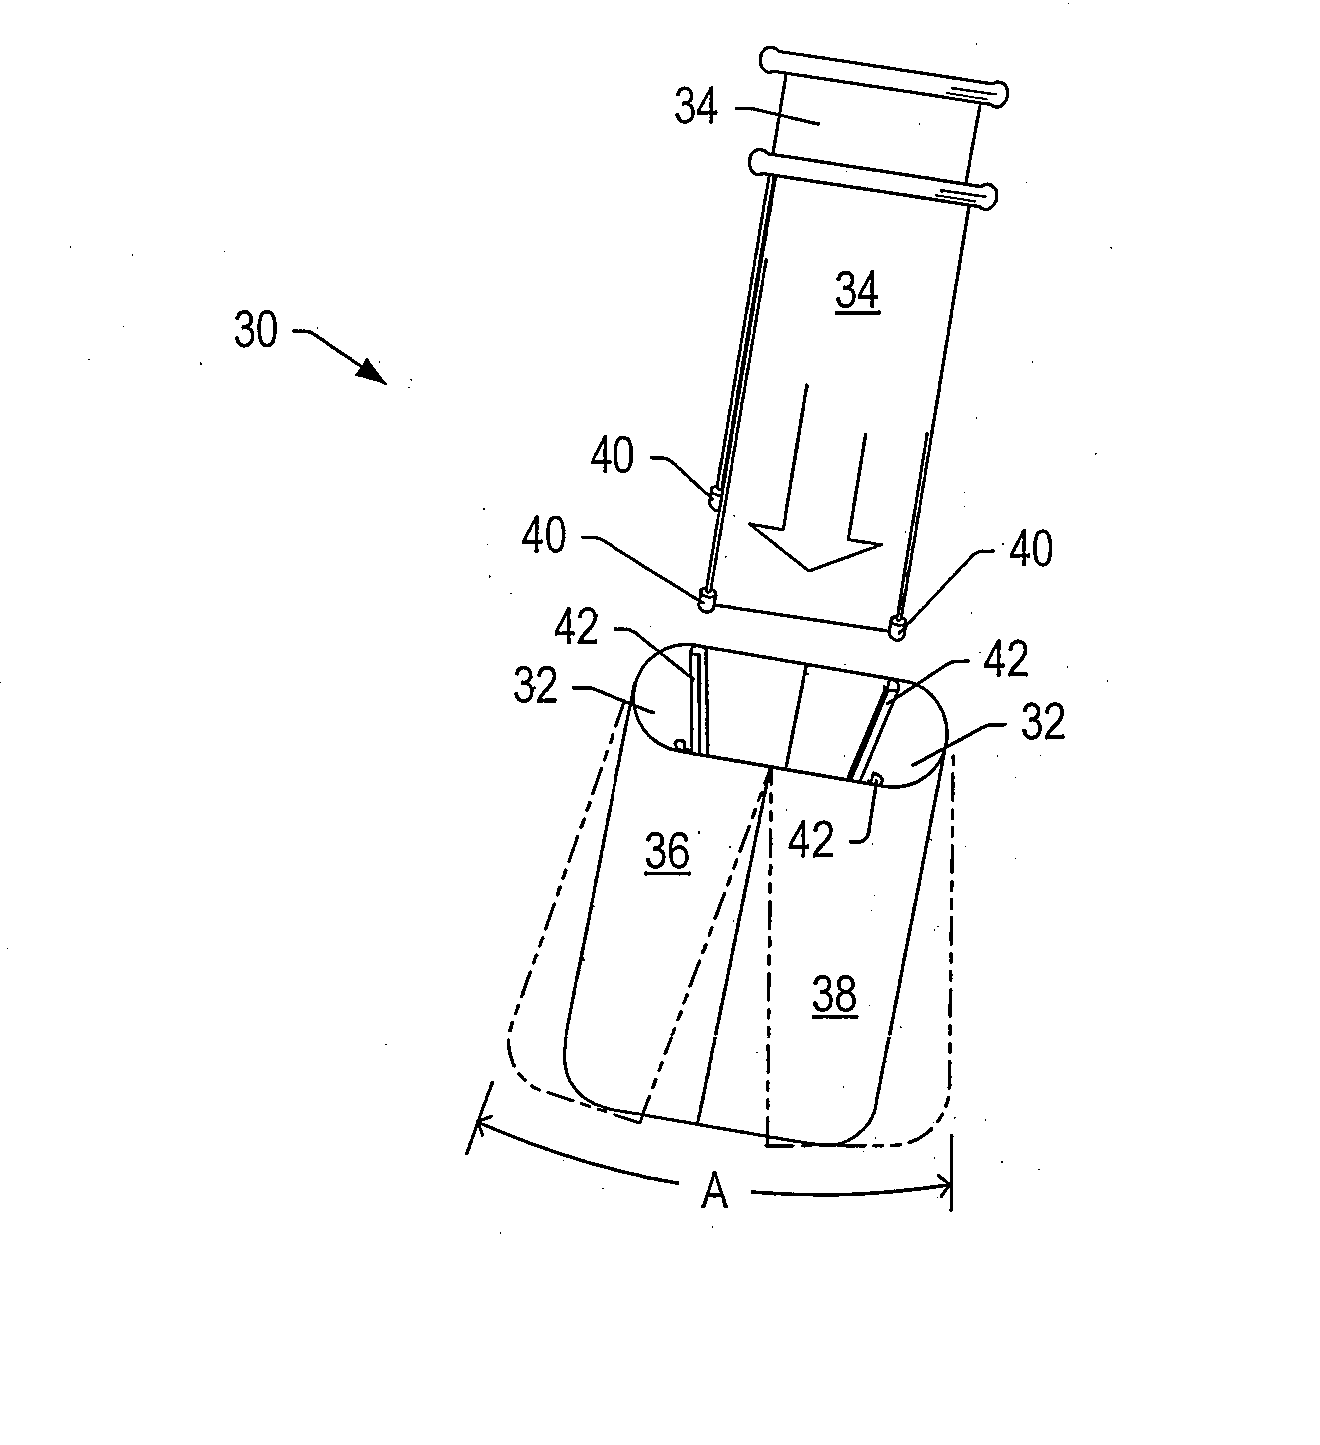 Surgical retractor and method of use